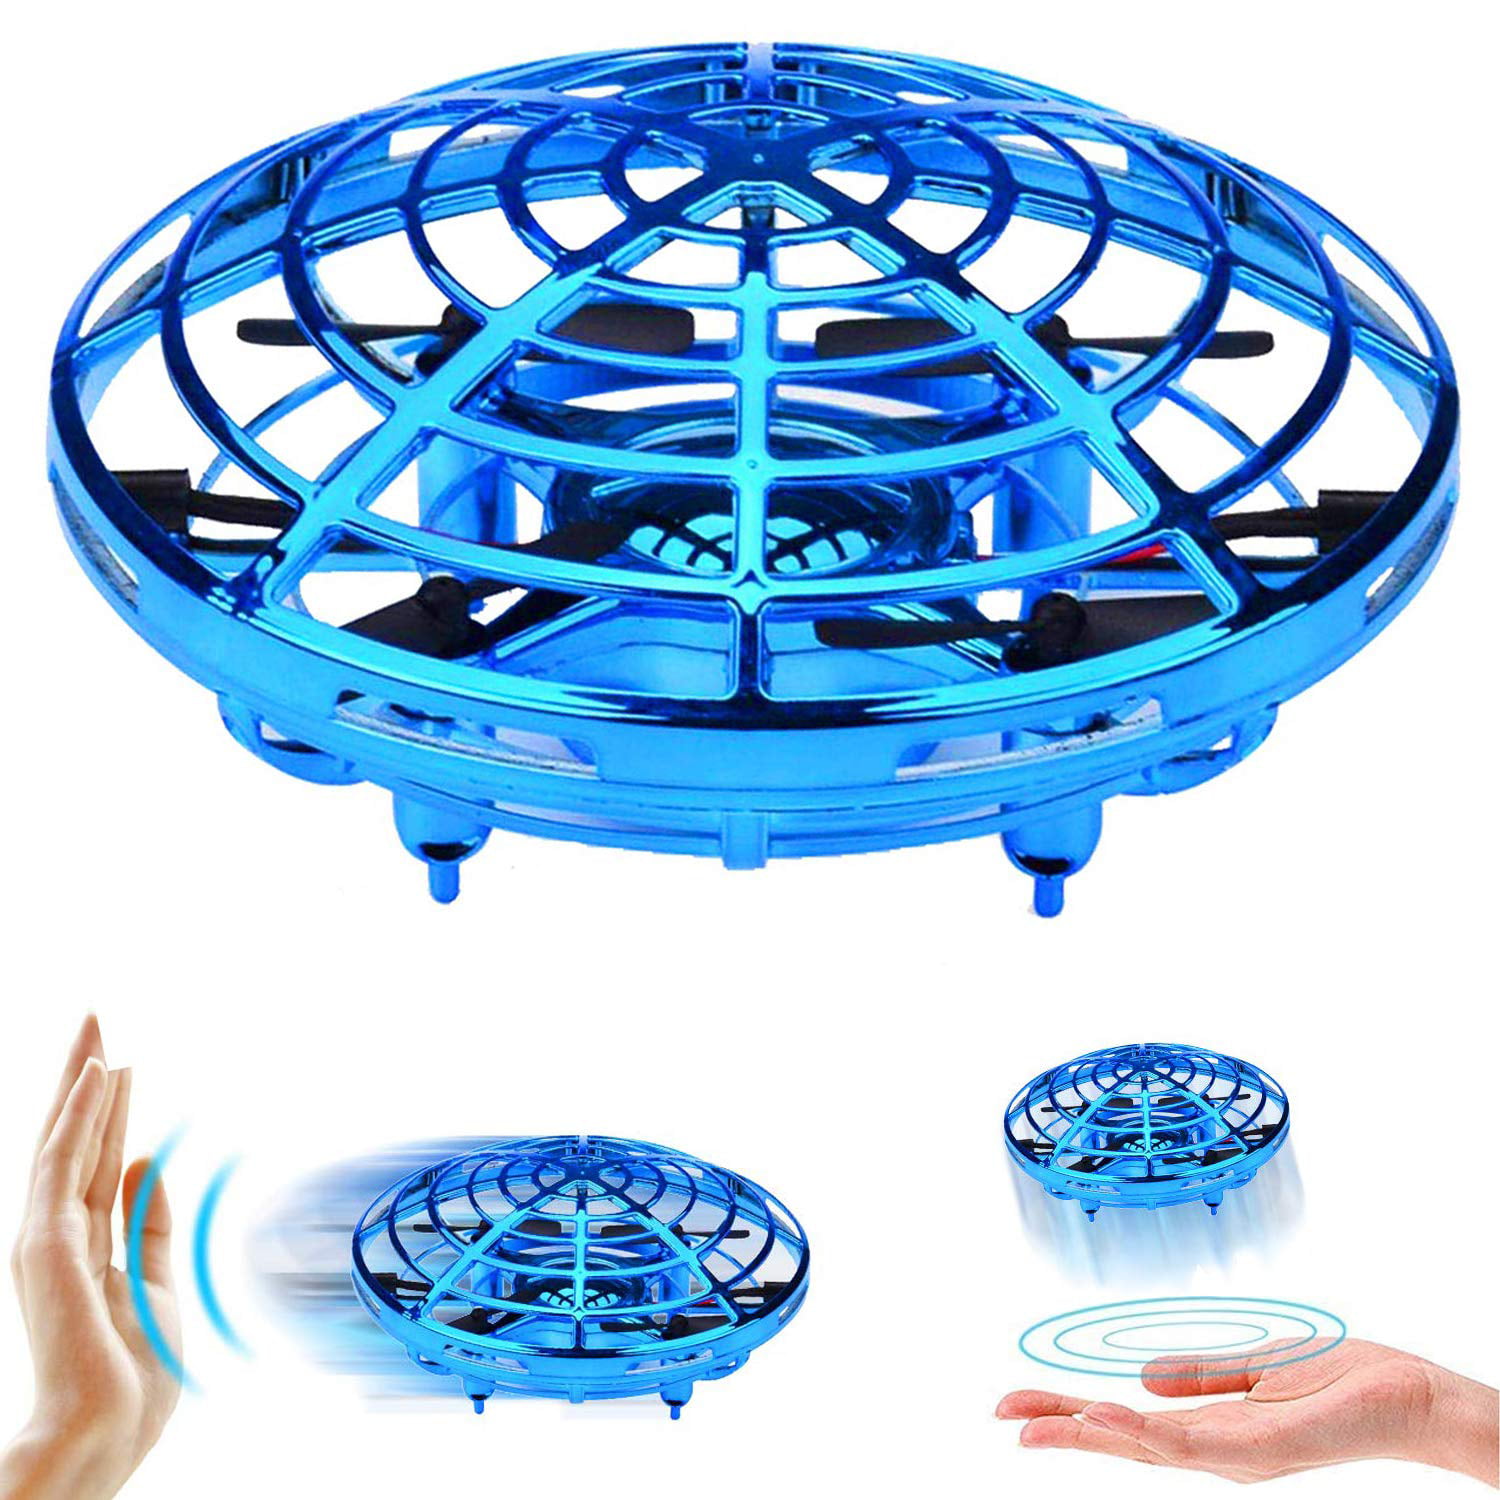 2-Speed Interactive Flying Orb Upgraded 5 Infrared Sensors Red TMANGO UFO Hand-Controlled Mini Drones Toys Boys & Girls 360°Rotating Flying Ball with LED Light for Kids